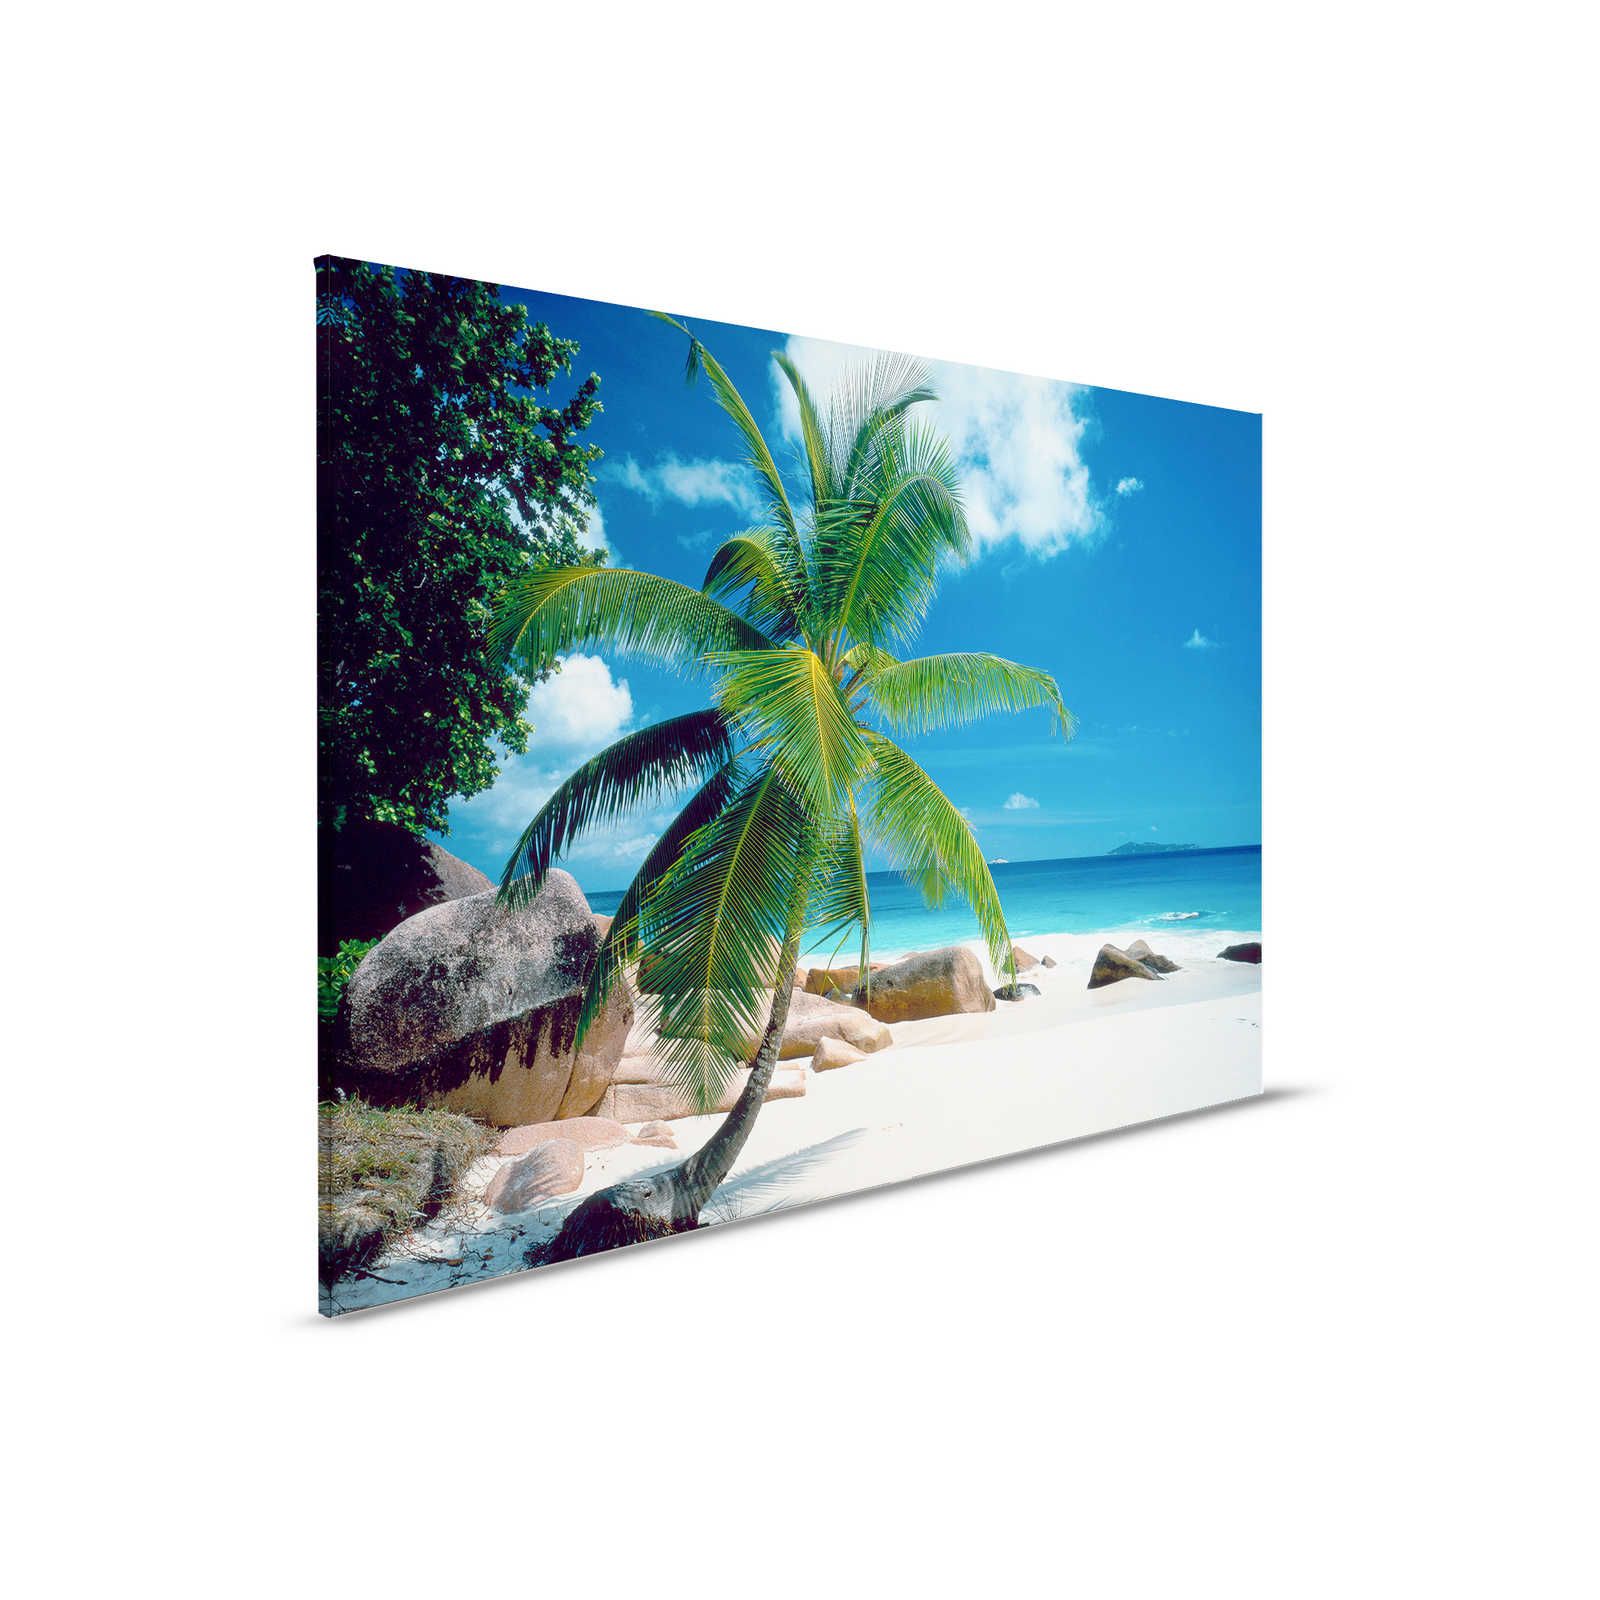         Canvas painting Beach with Palm Tree - 0,90 m x 0,60 m
    